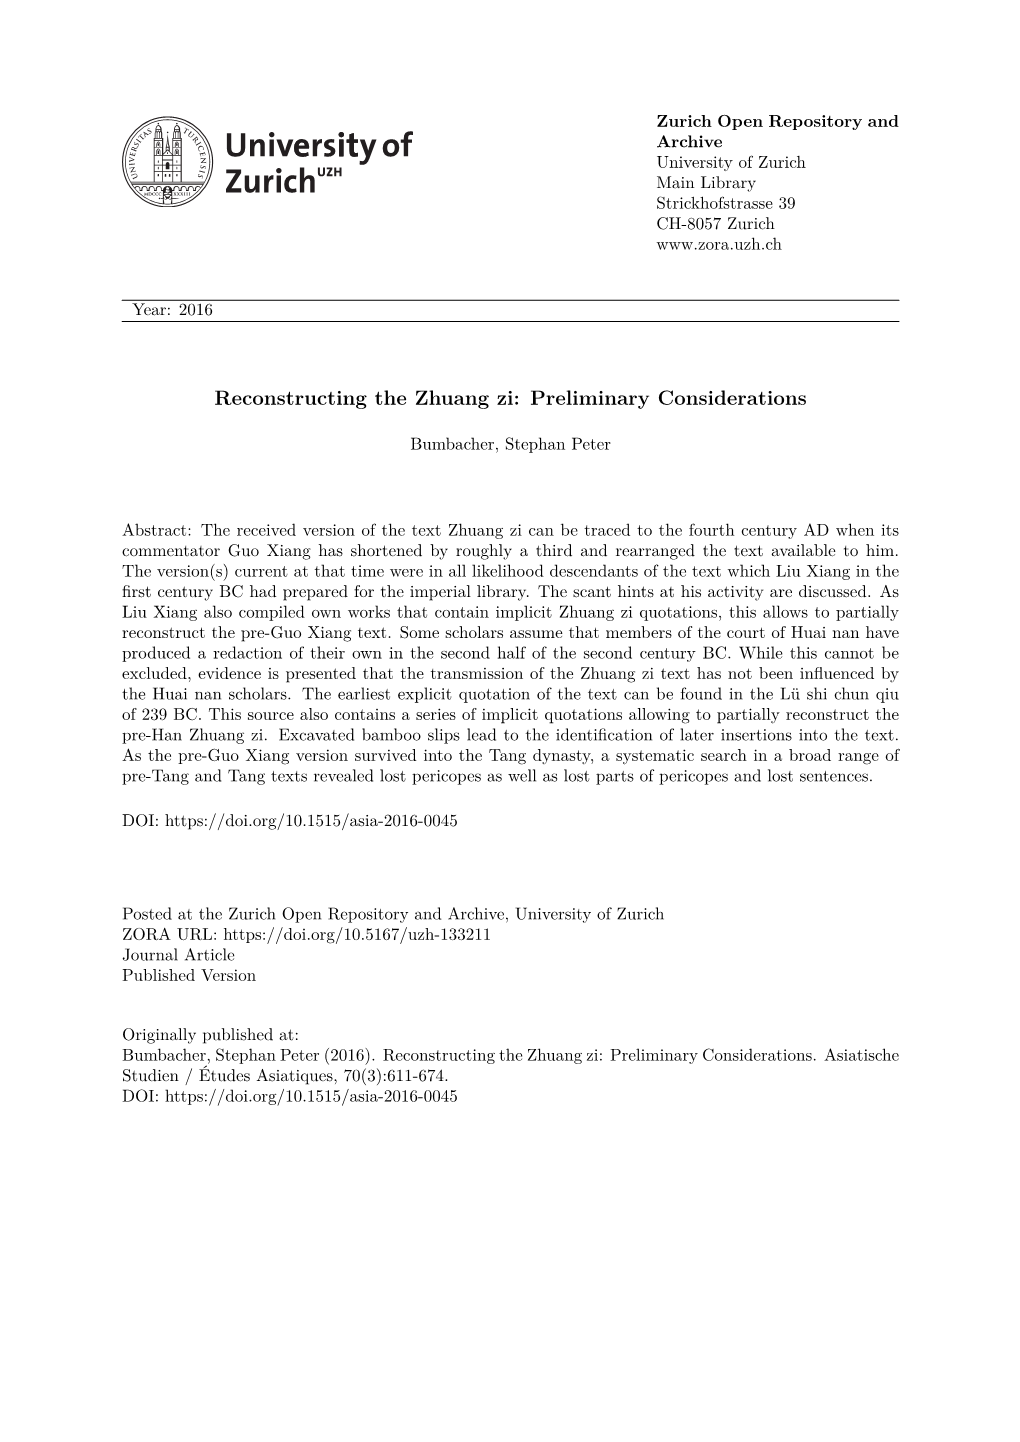 Reconstructing the Zhuang Zi: Preliminary Considerations